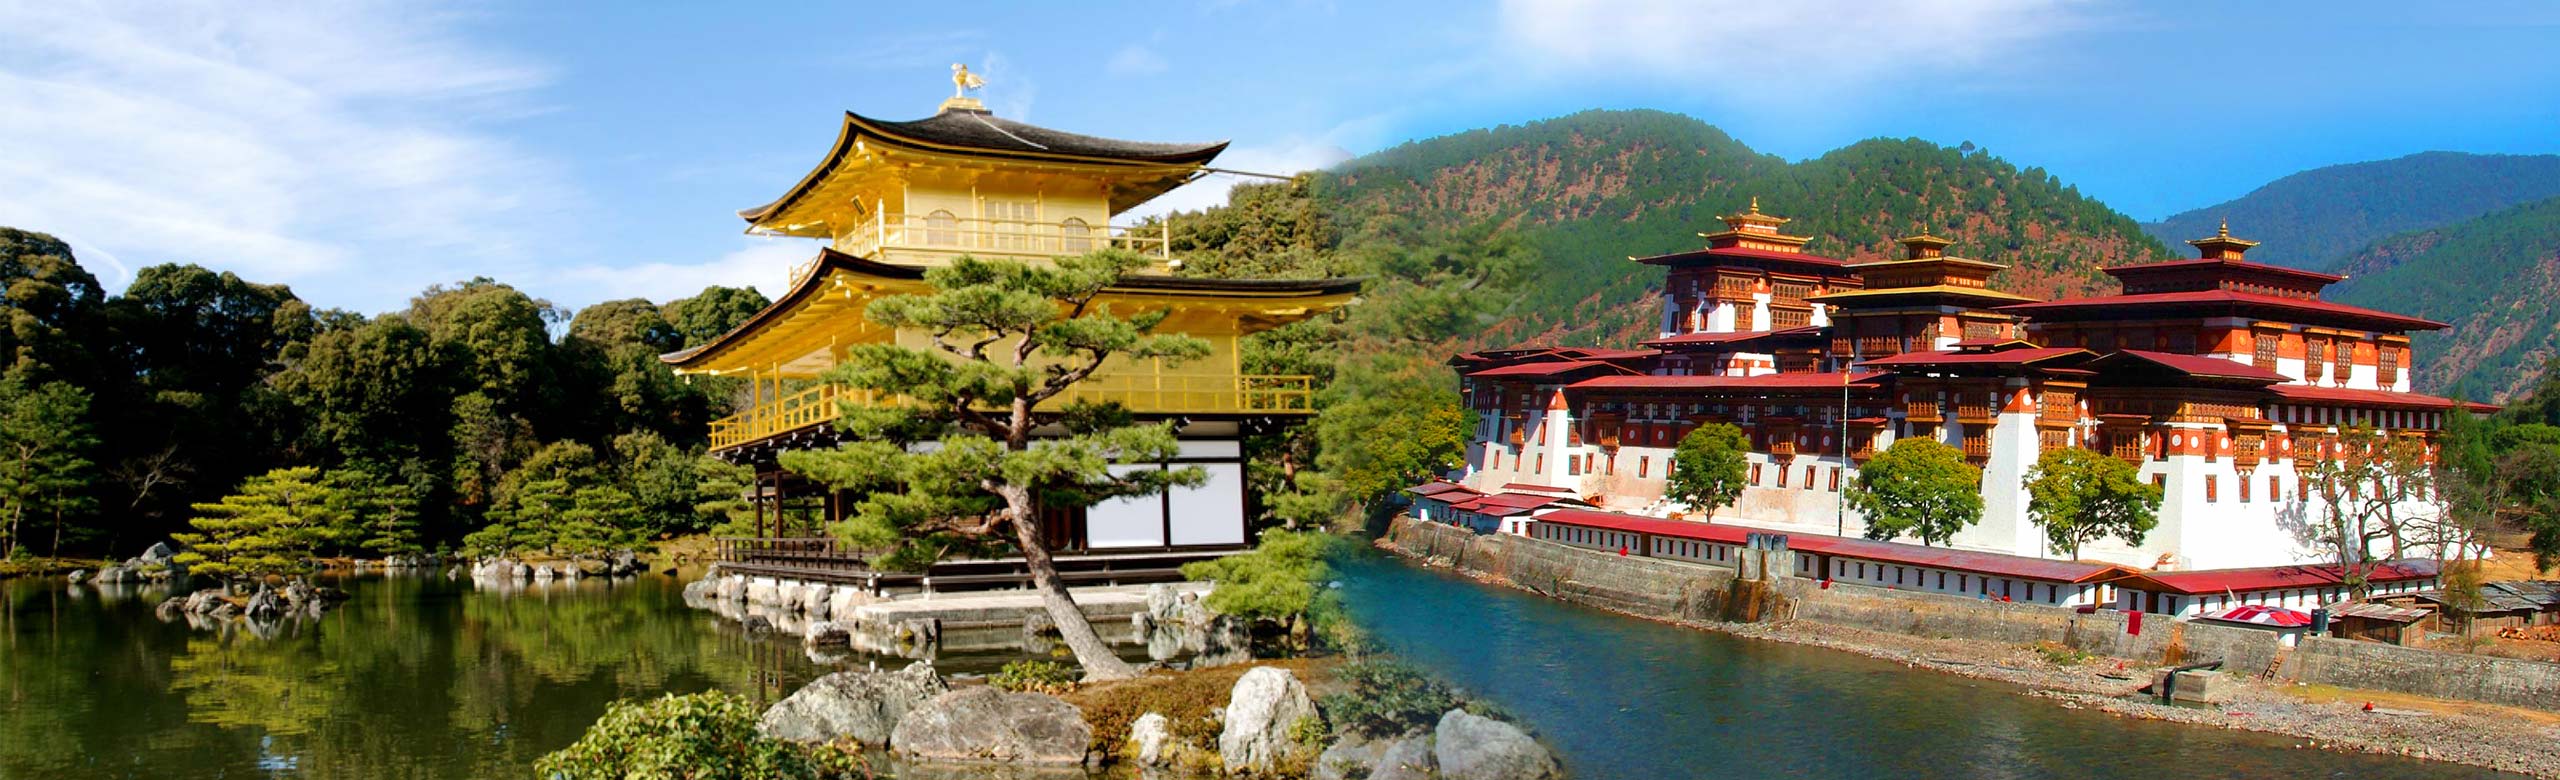 How to Get to Bhutan from Japan